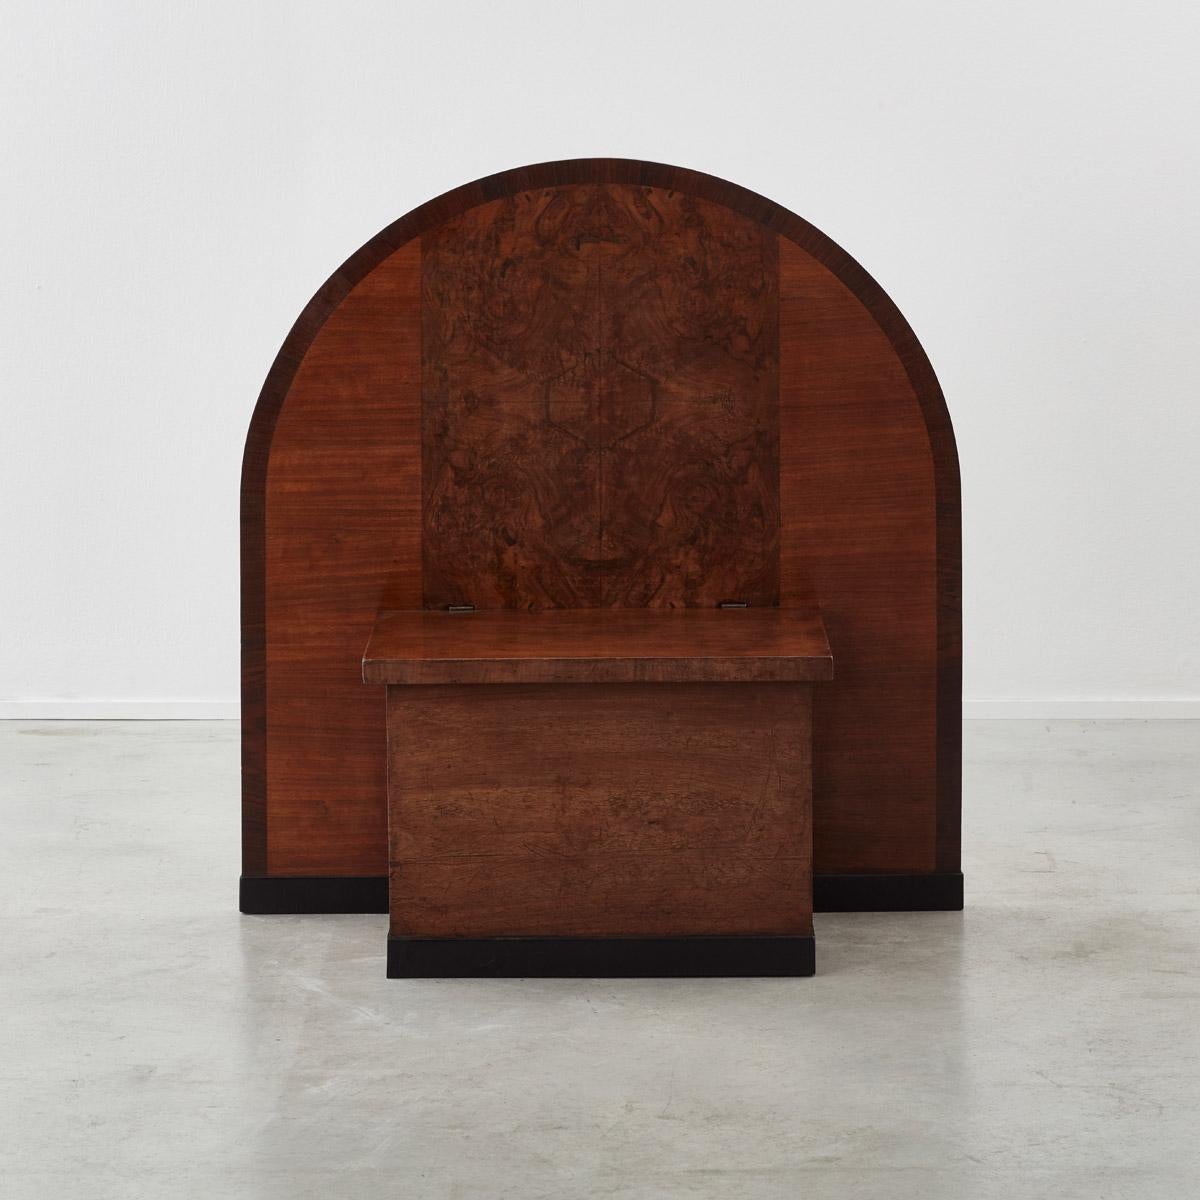 A striking entrance bench with storage box and tall arched back. With beautiful, burred walnut veneer panels to the back. Made by the producer Piozzi Provini in the town of Cesano Maderno in Northern Italy in early to mid-20th century. An unusual